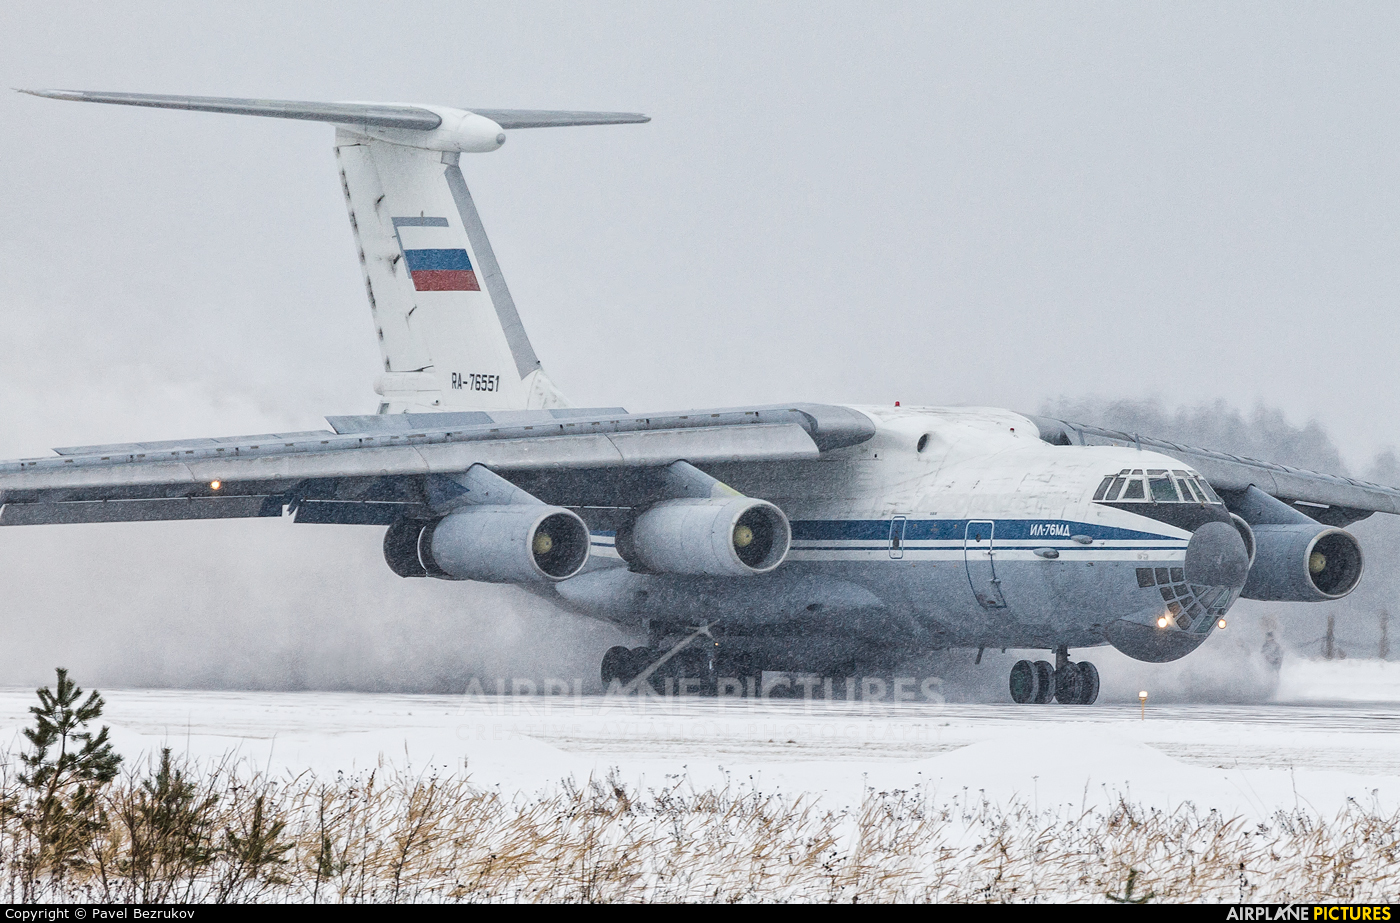 Russia - Air Force RA-76551 aircraft at Undisclosed Location